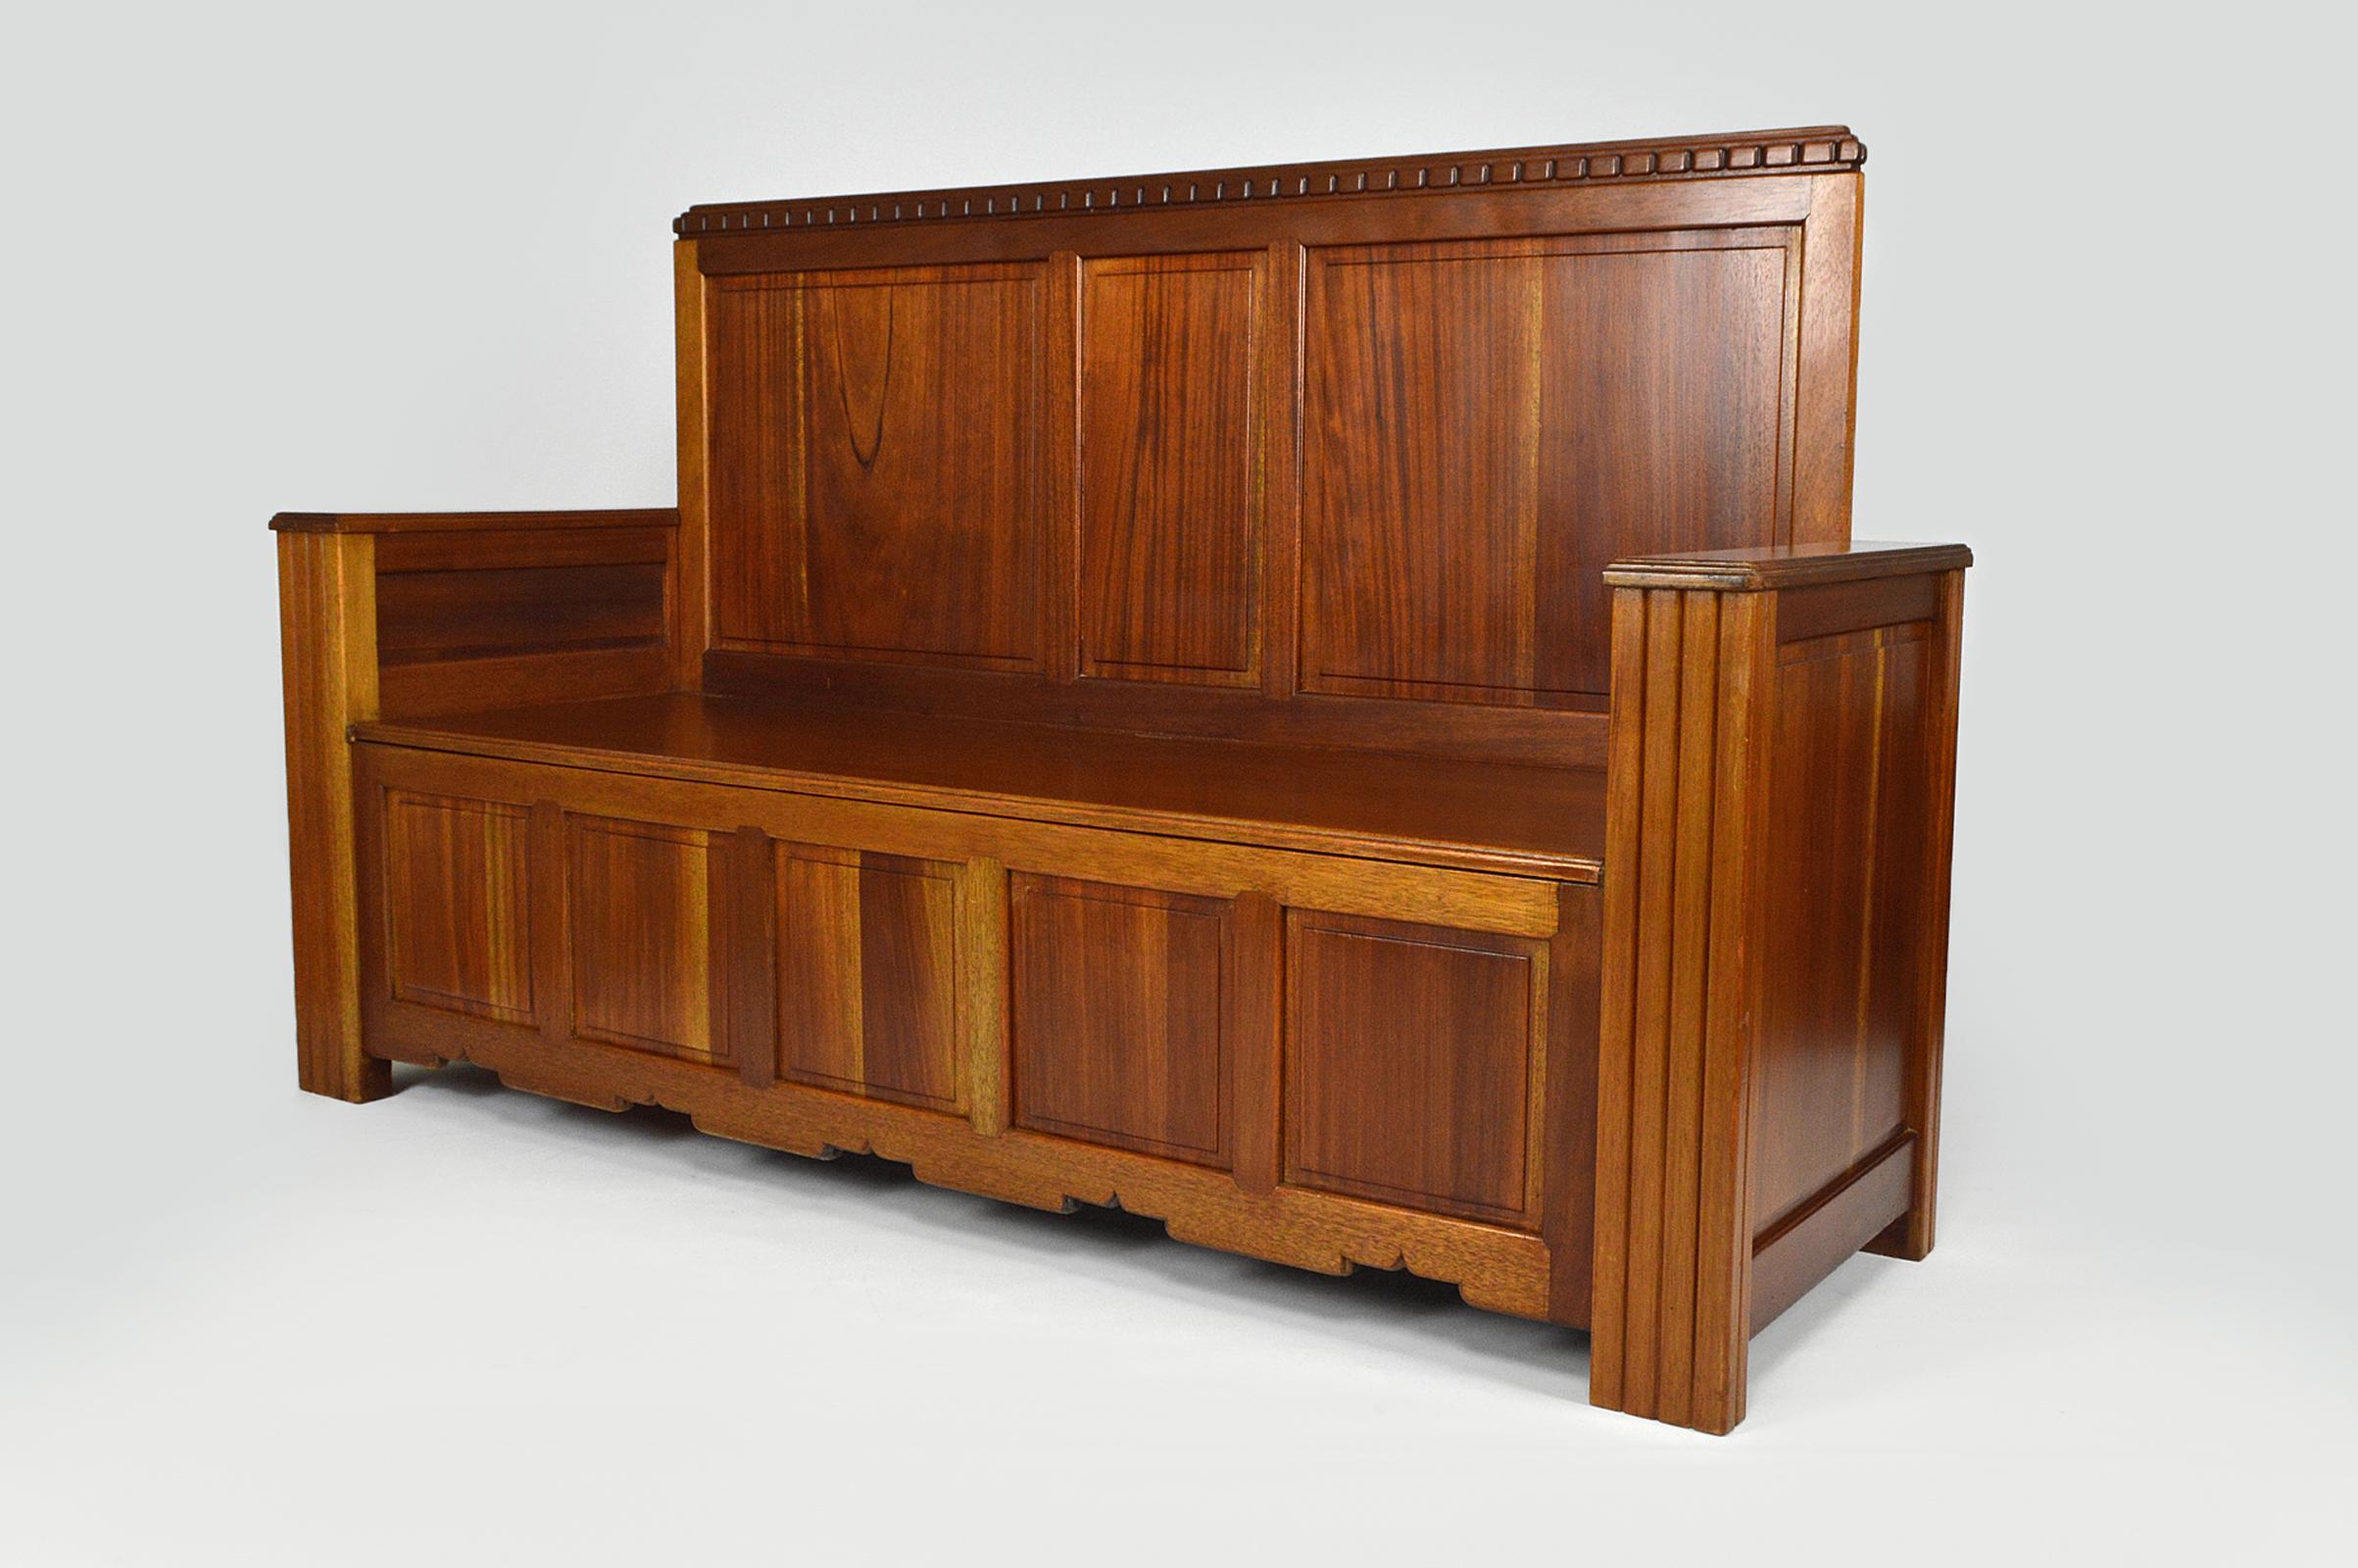 Rare mahogany bench-chest by Clément Goyeneche, known for his work as a french architect, painter, designer and decorator.

His production of furniture is rare and exclusive: he has designed, decorated and furnished many villas and buildings on the